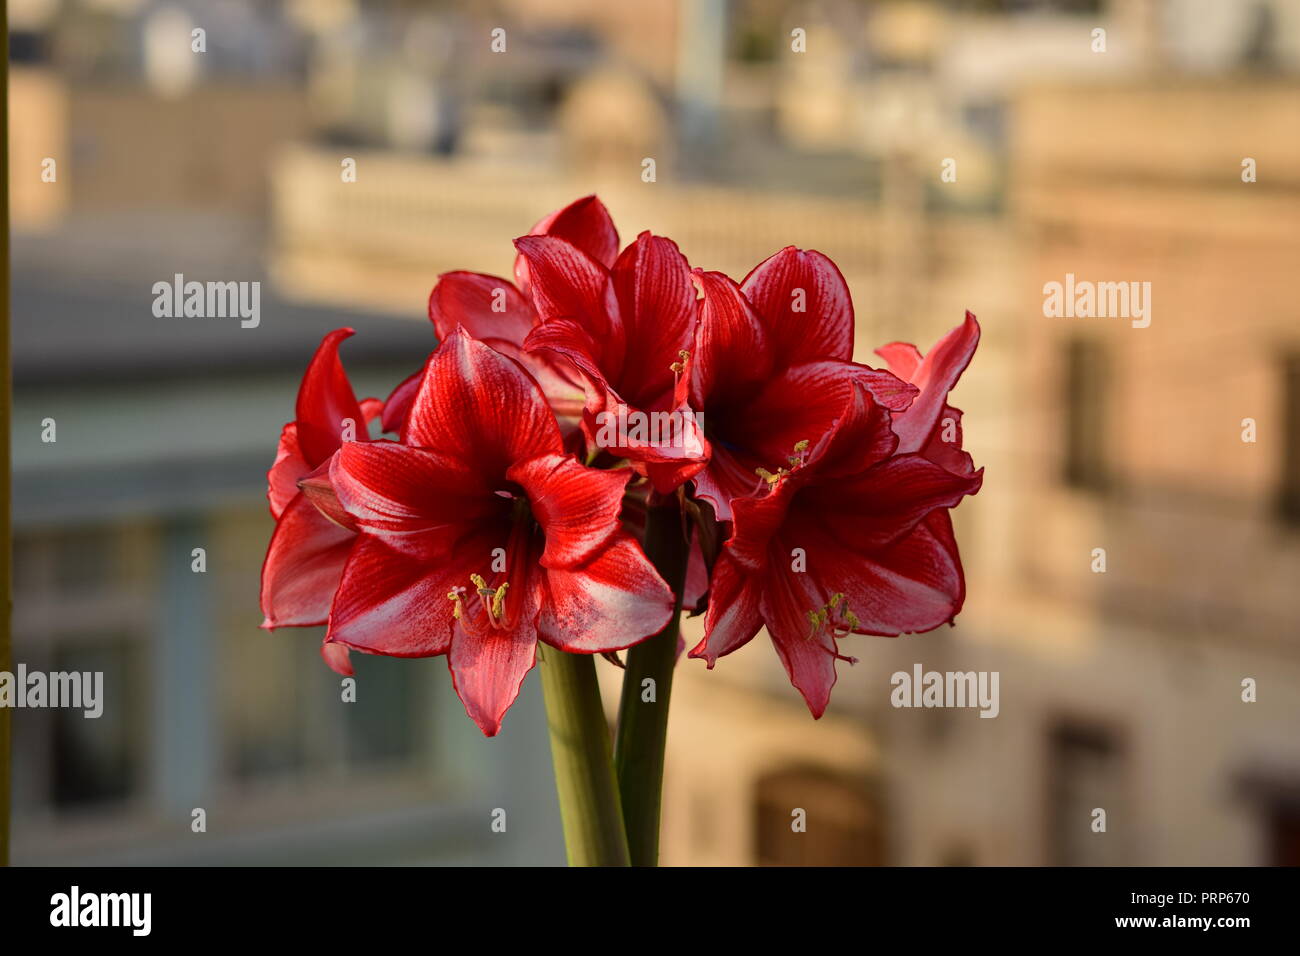 A bunch of Charisma Amaryllis flowers, from two stems coming out of the same bulb. White red petals with pollen stamens. Gardening, roof garden, Malta Stock Photo